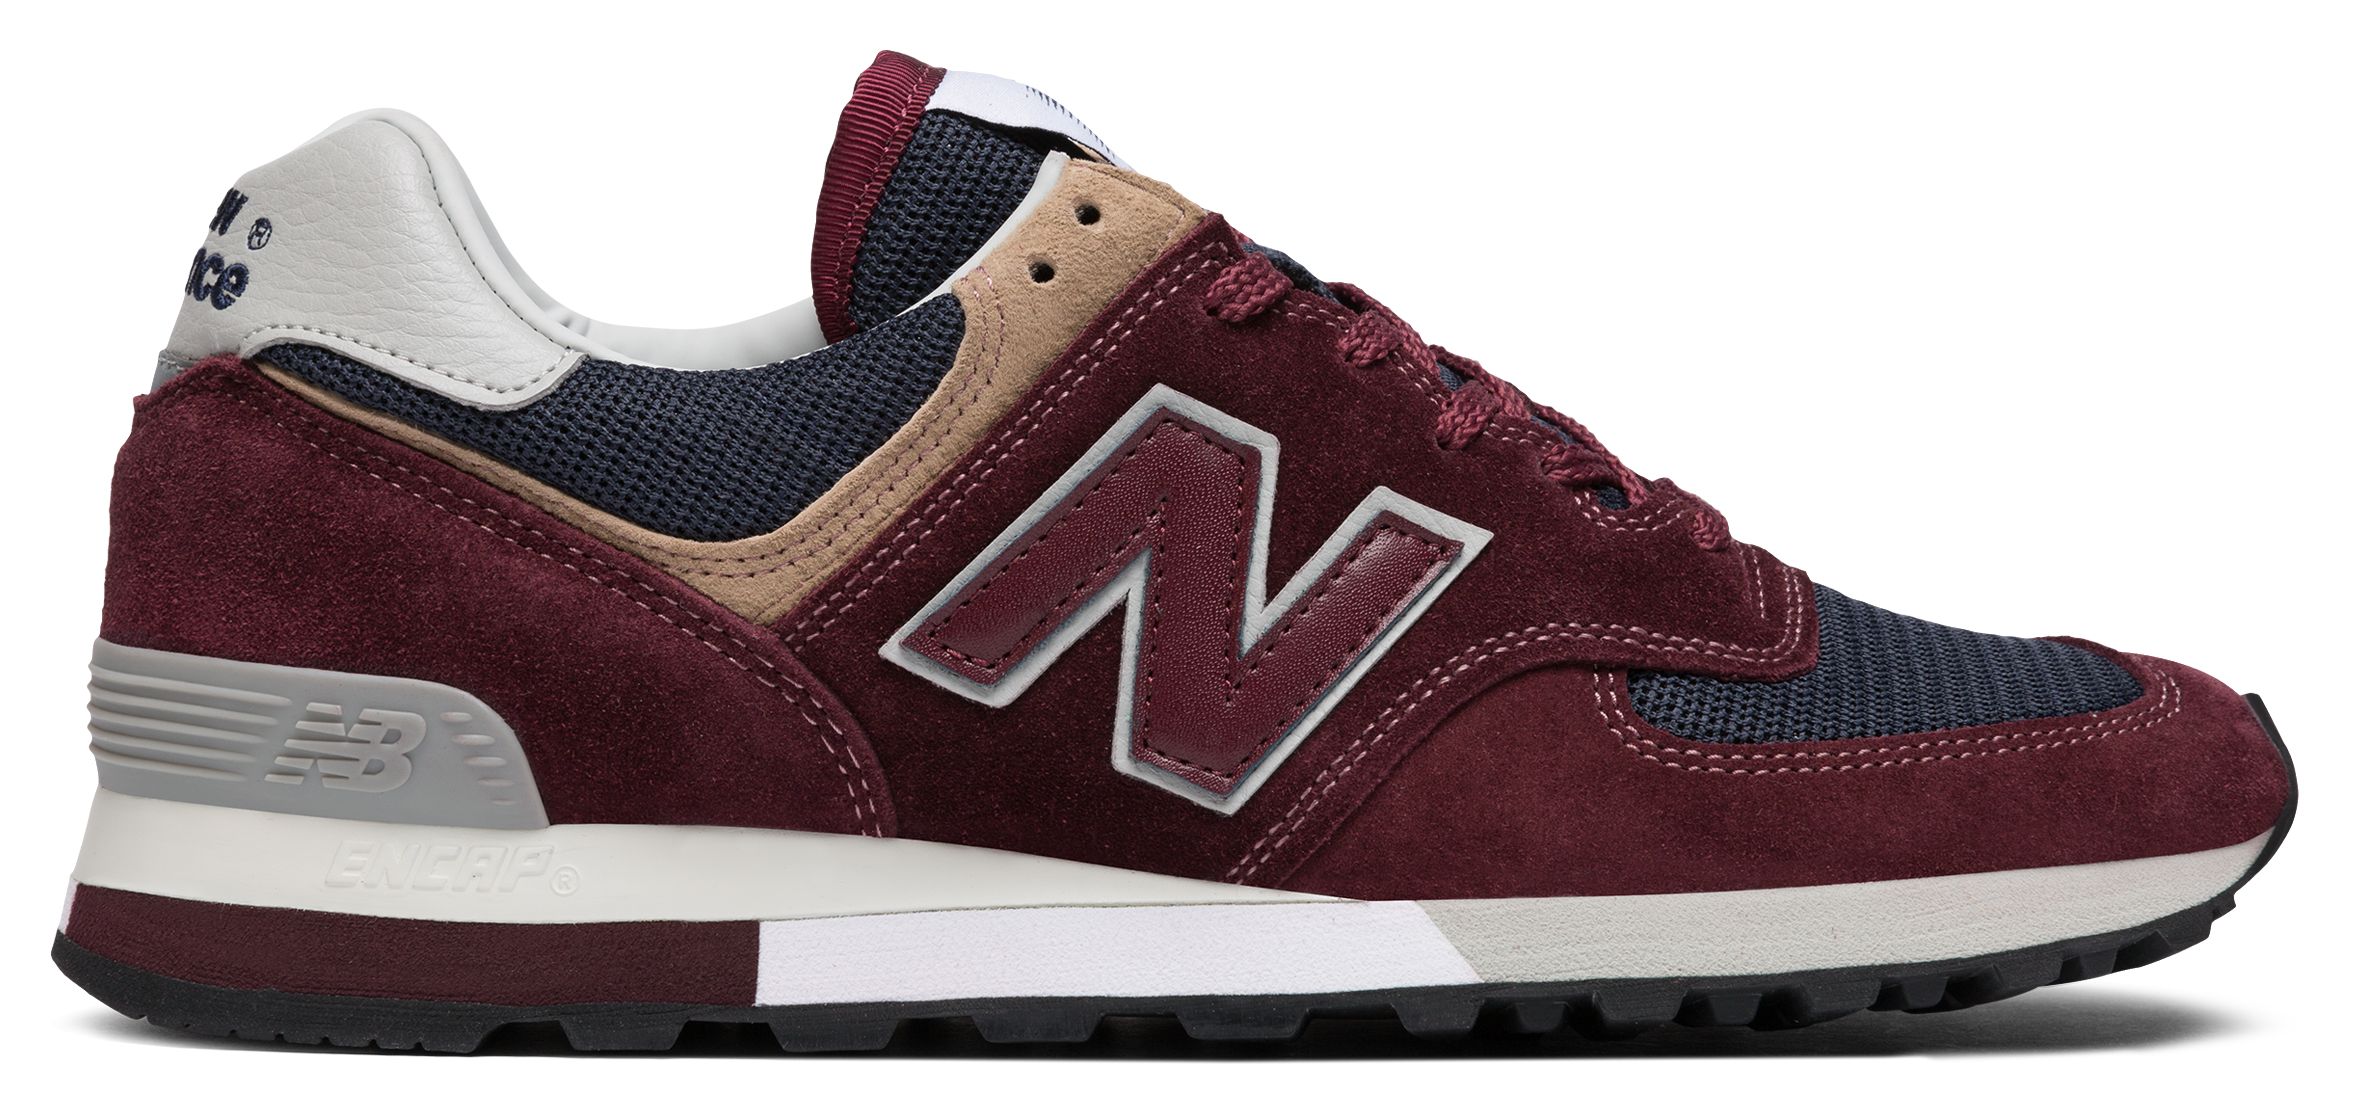 new balance 576 made in england